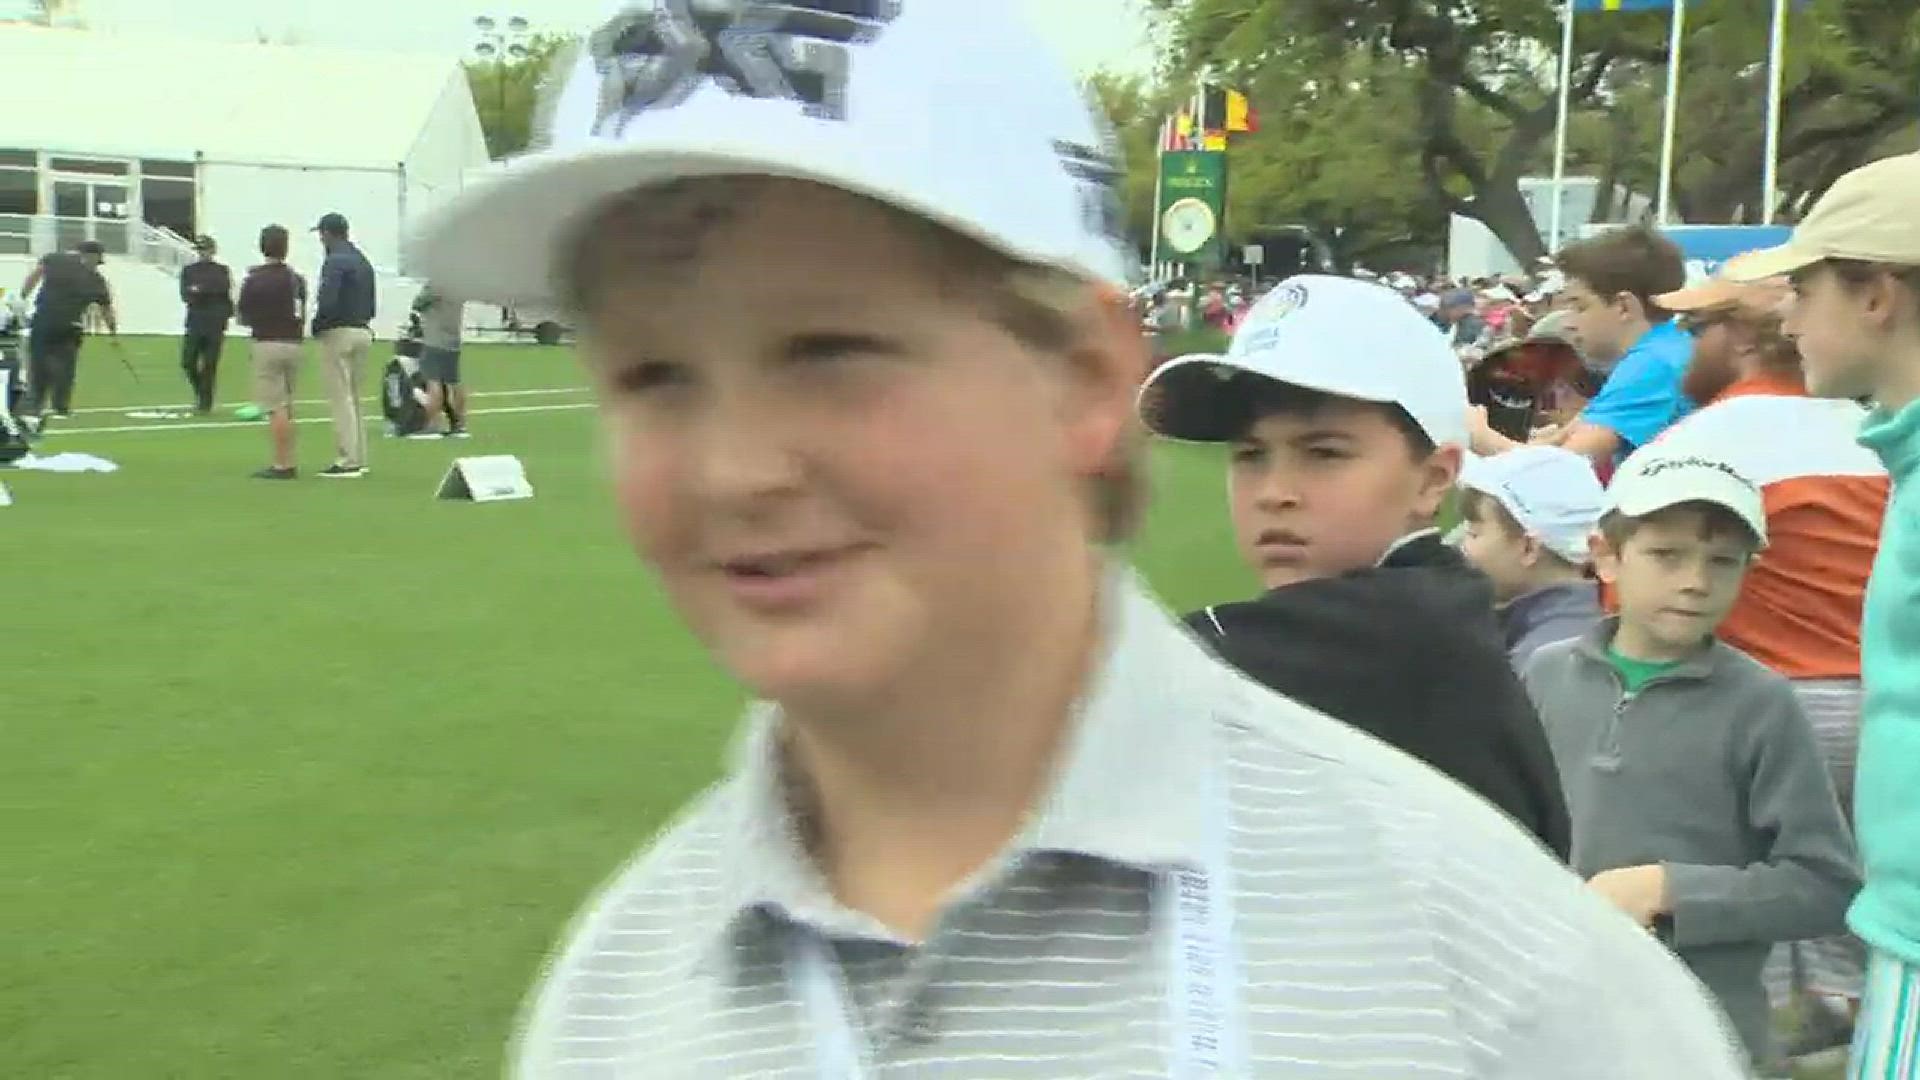 Jordan Spieth has autographed this young man's forehead 4-times at Dell Match Play.